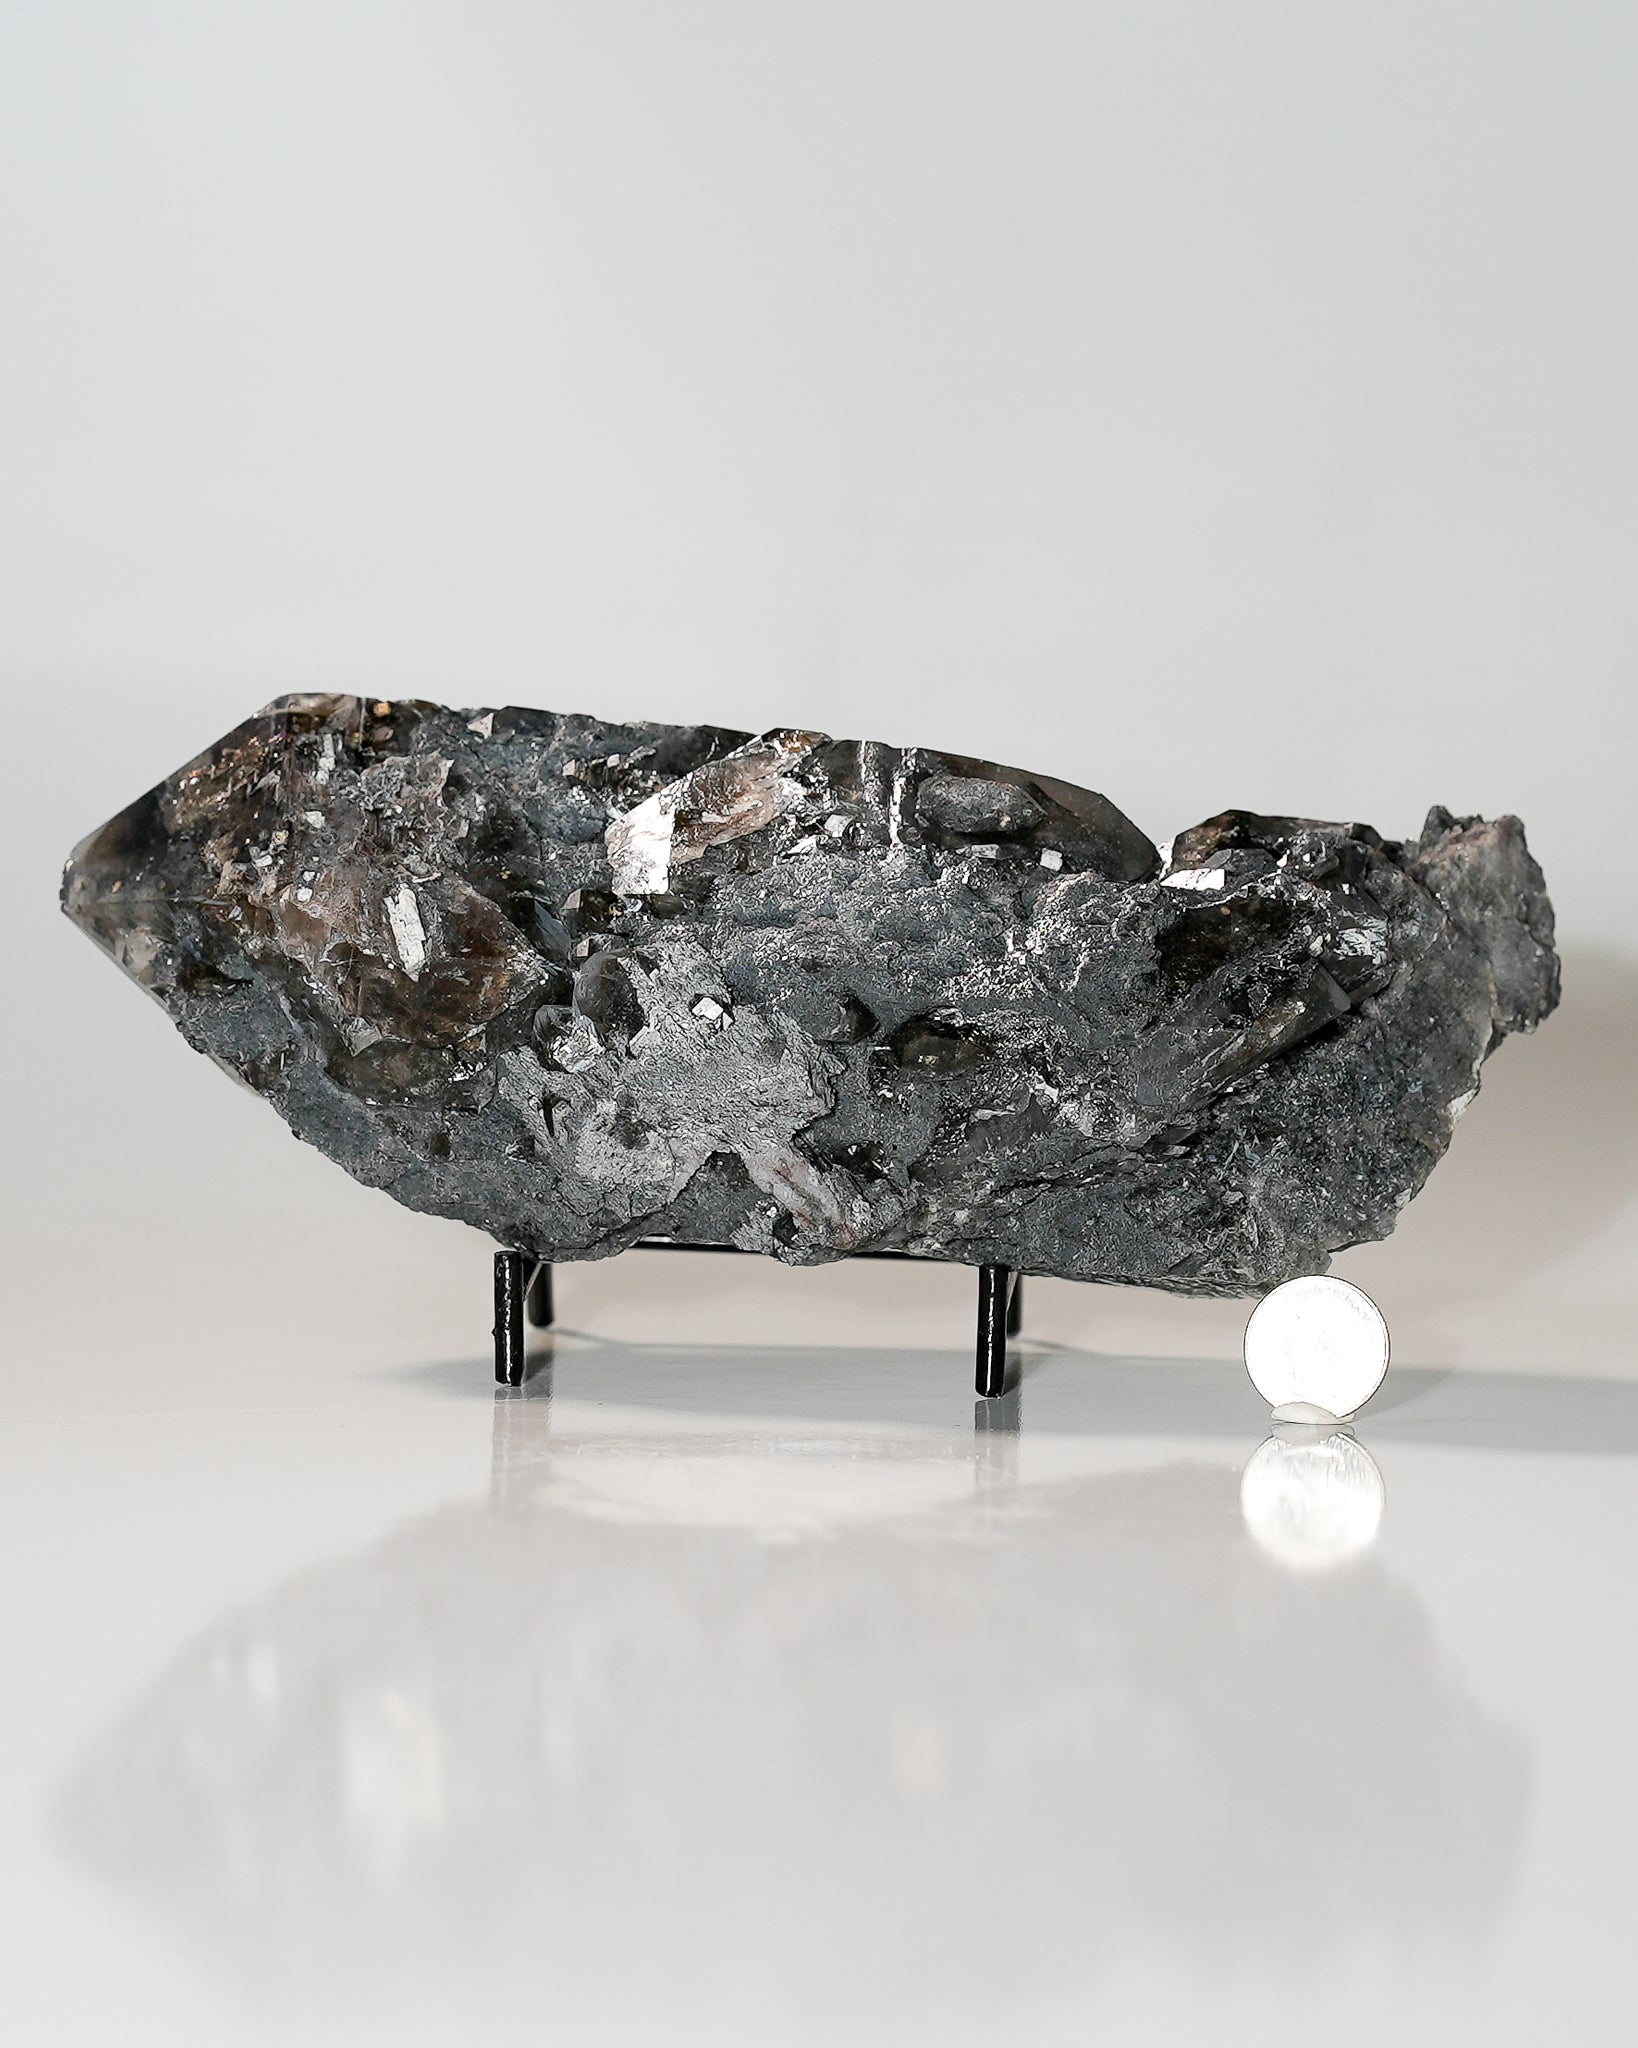 Hematite included Quartz with Phantoms and Overgrowths